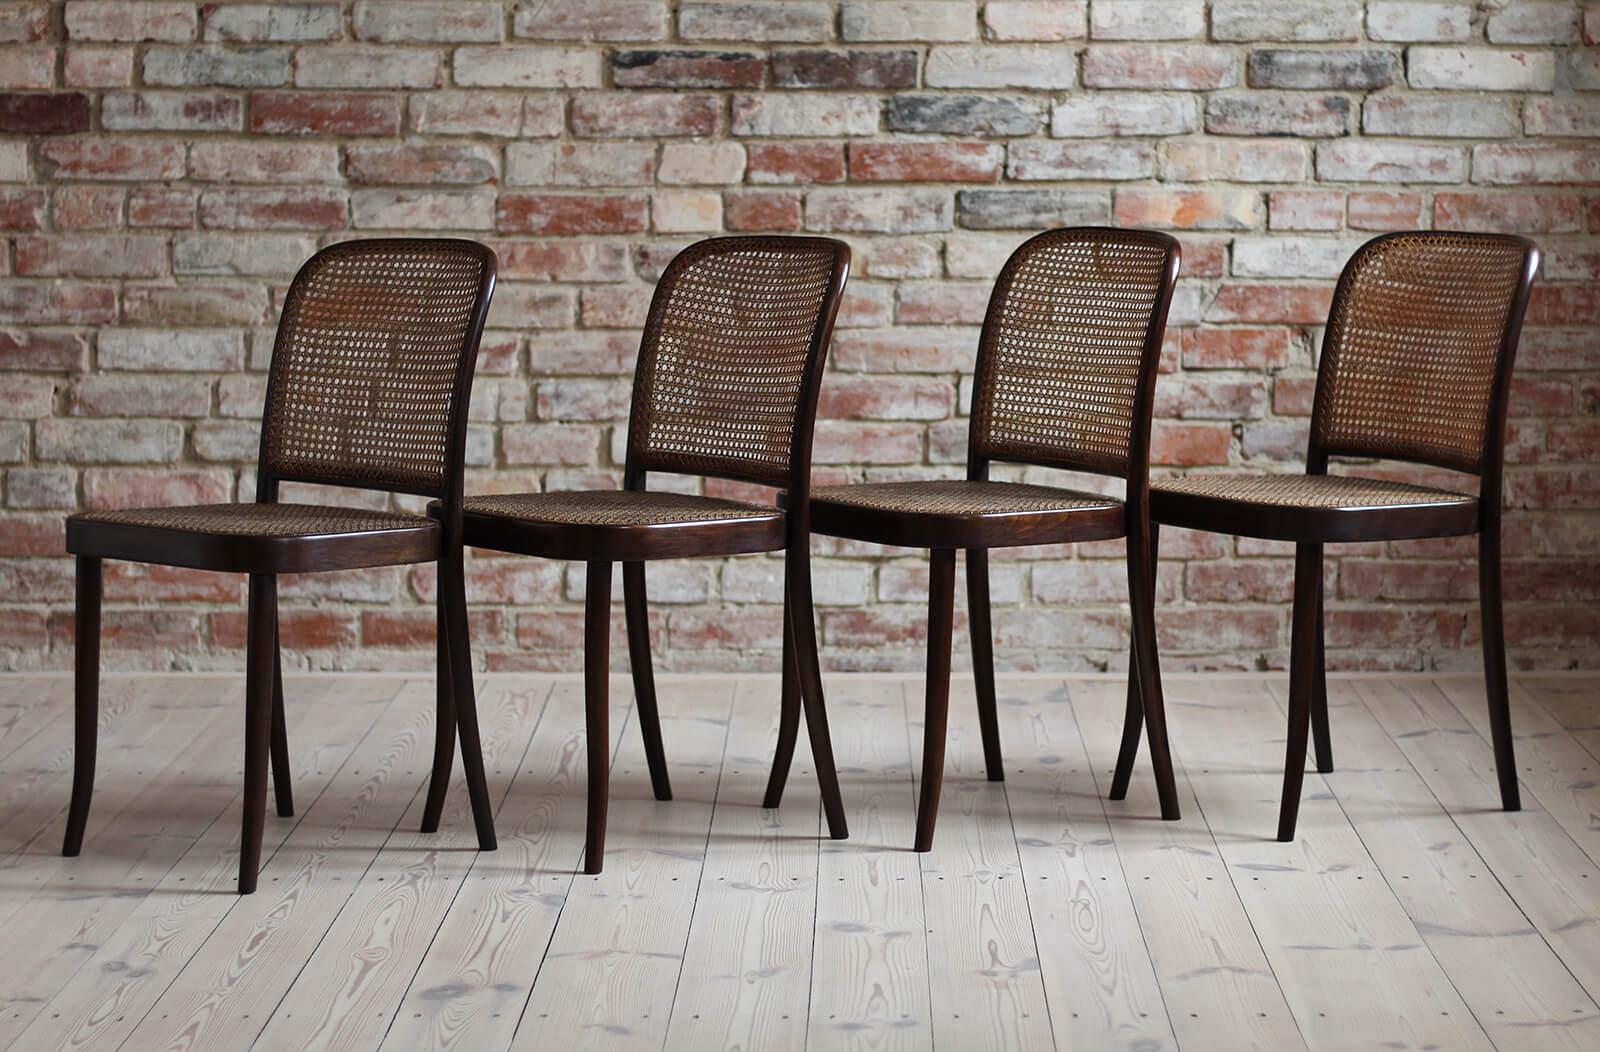 This set of four dining chairs was designed by Mr. Josef Hoffmann and produced by famous Thonet brand around 1940s. The chairs have been professionally restored. The wooden surface got a refreshed finish in shellac polish and wax that protects the